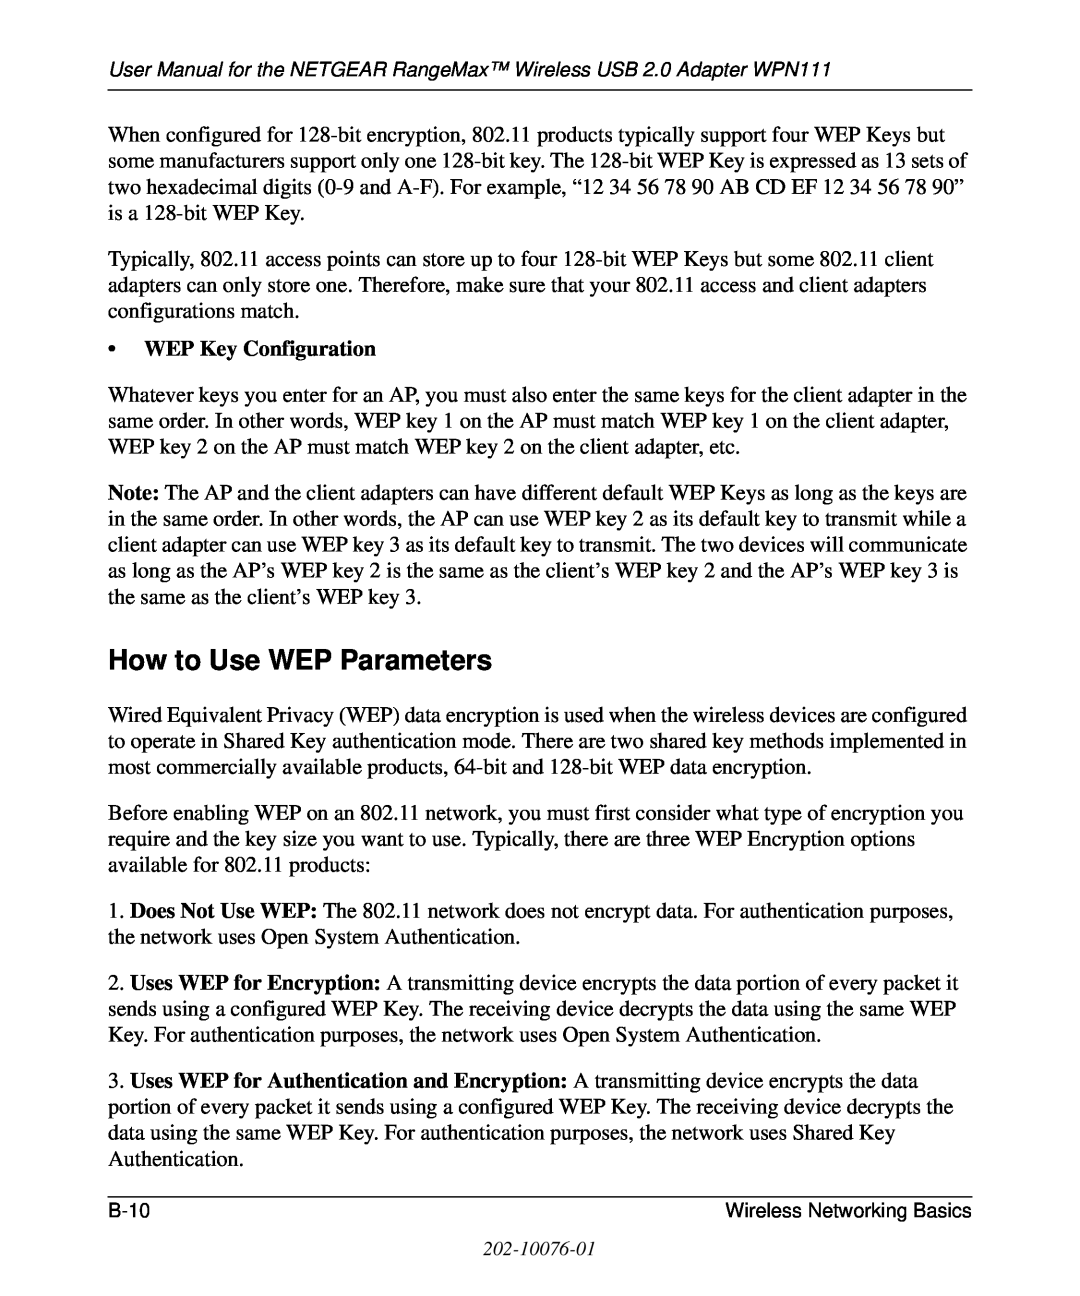 NETGEAR WPN111 user manual How to Use WEP Parameters, WEP Key Configuration 